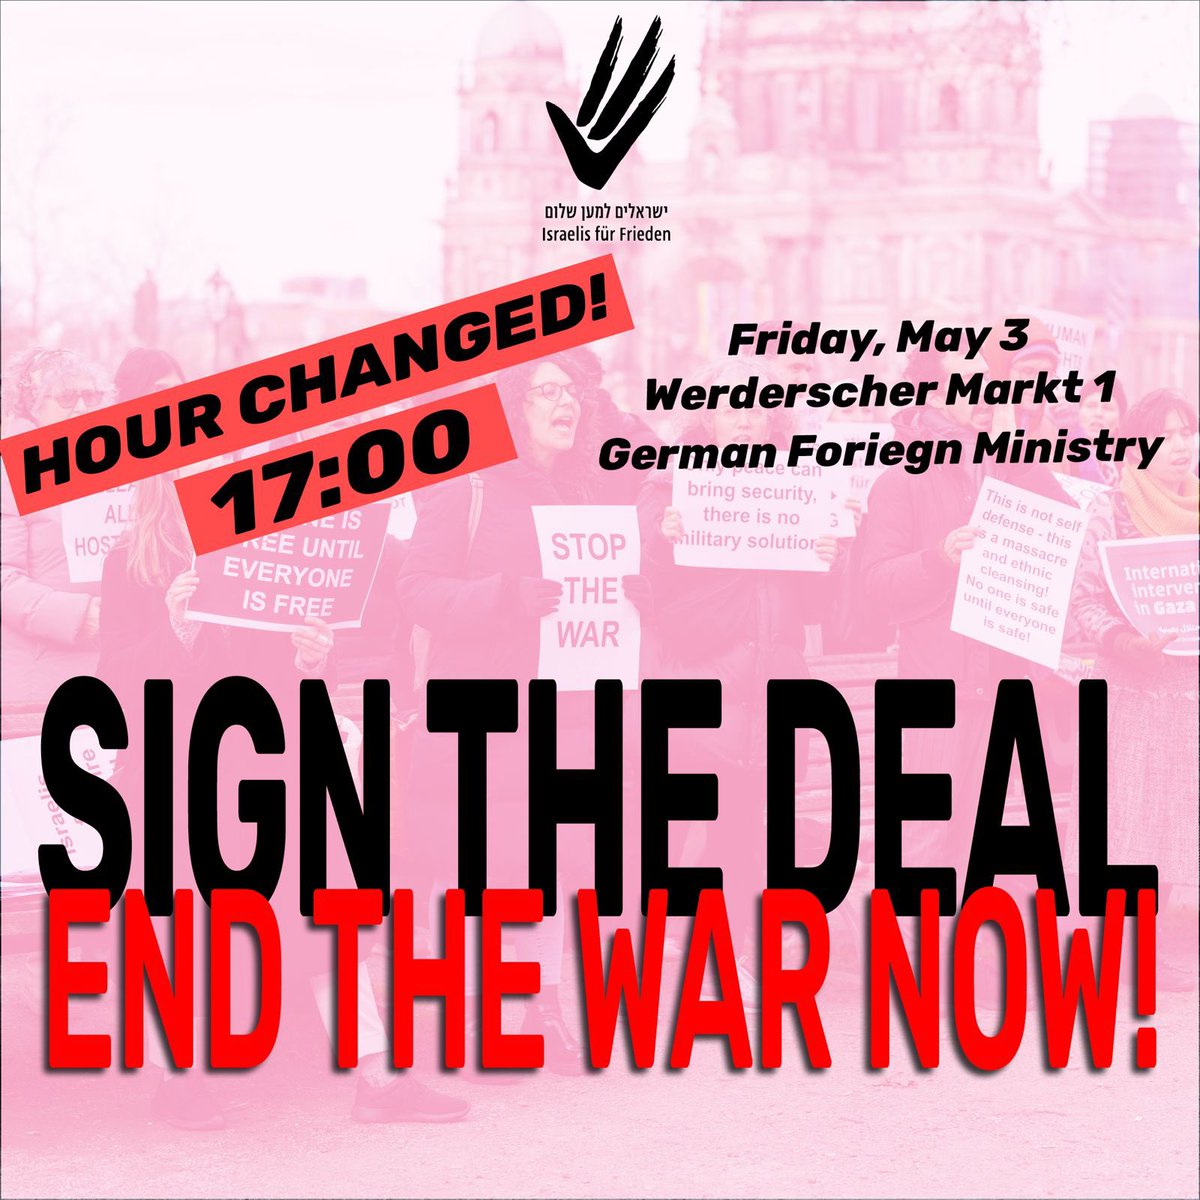 Sign the deal! End the war! Free Gaza! Release the hostages! Join us this Friday in front of the German Foreign Ministry. PAY ATTENTION TO CHANGE IN HOUR - WE MEET AT 17:00.